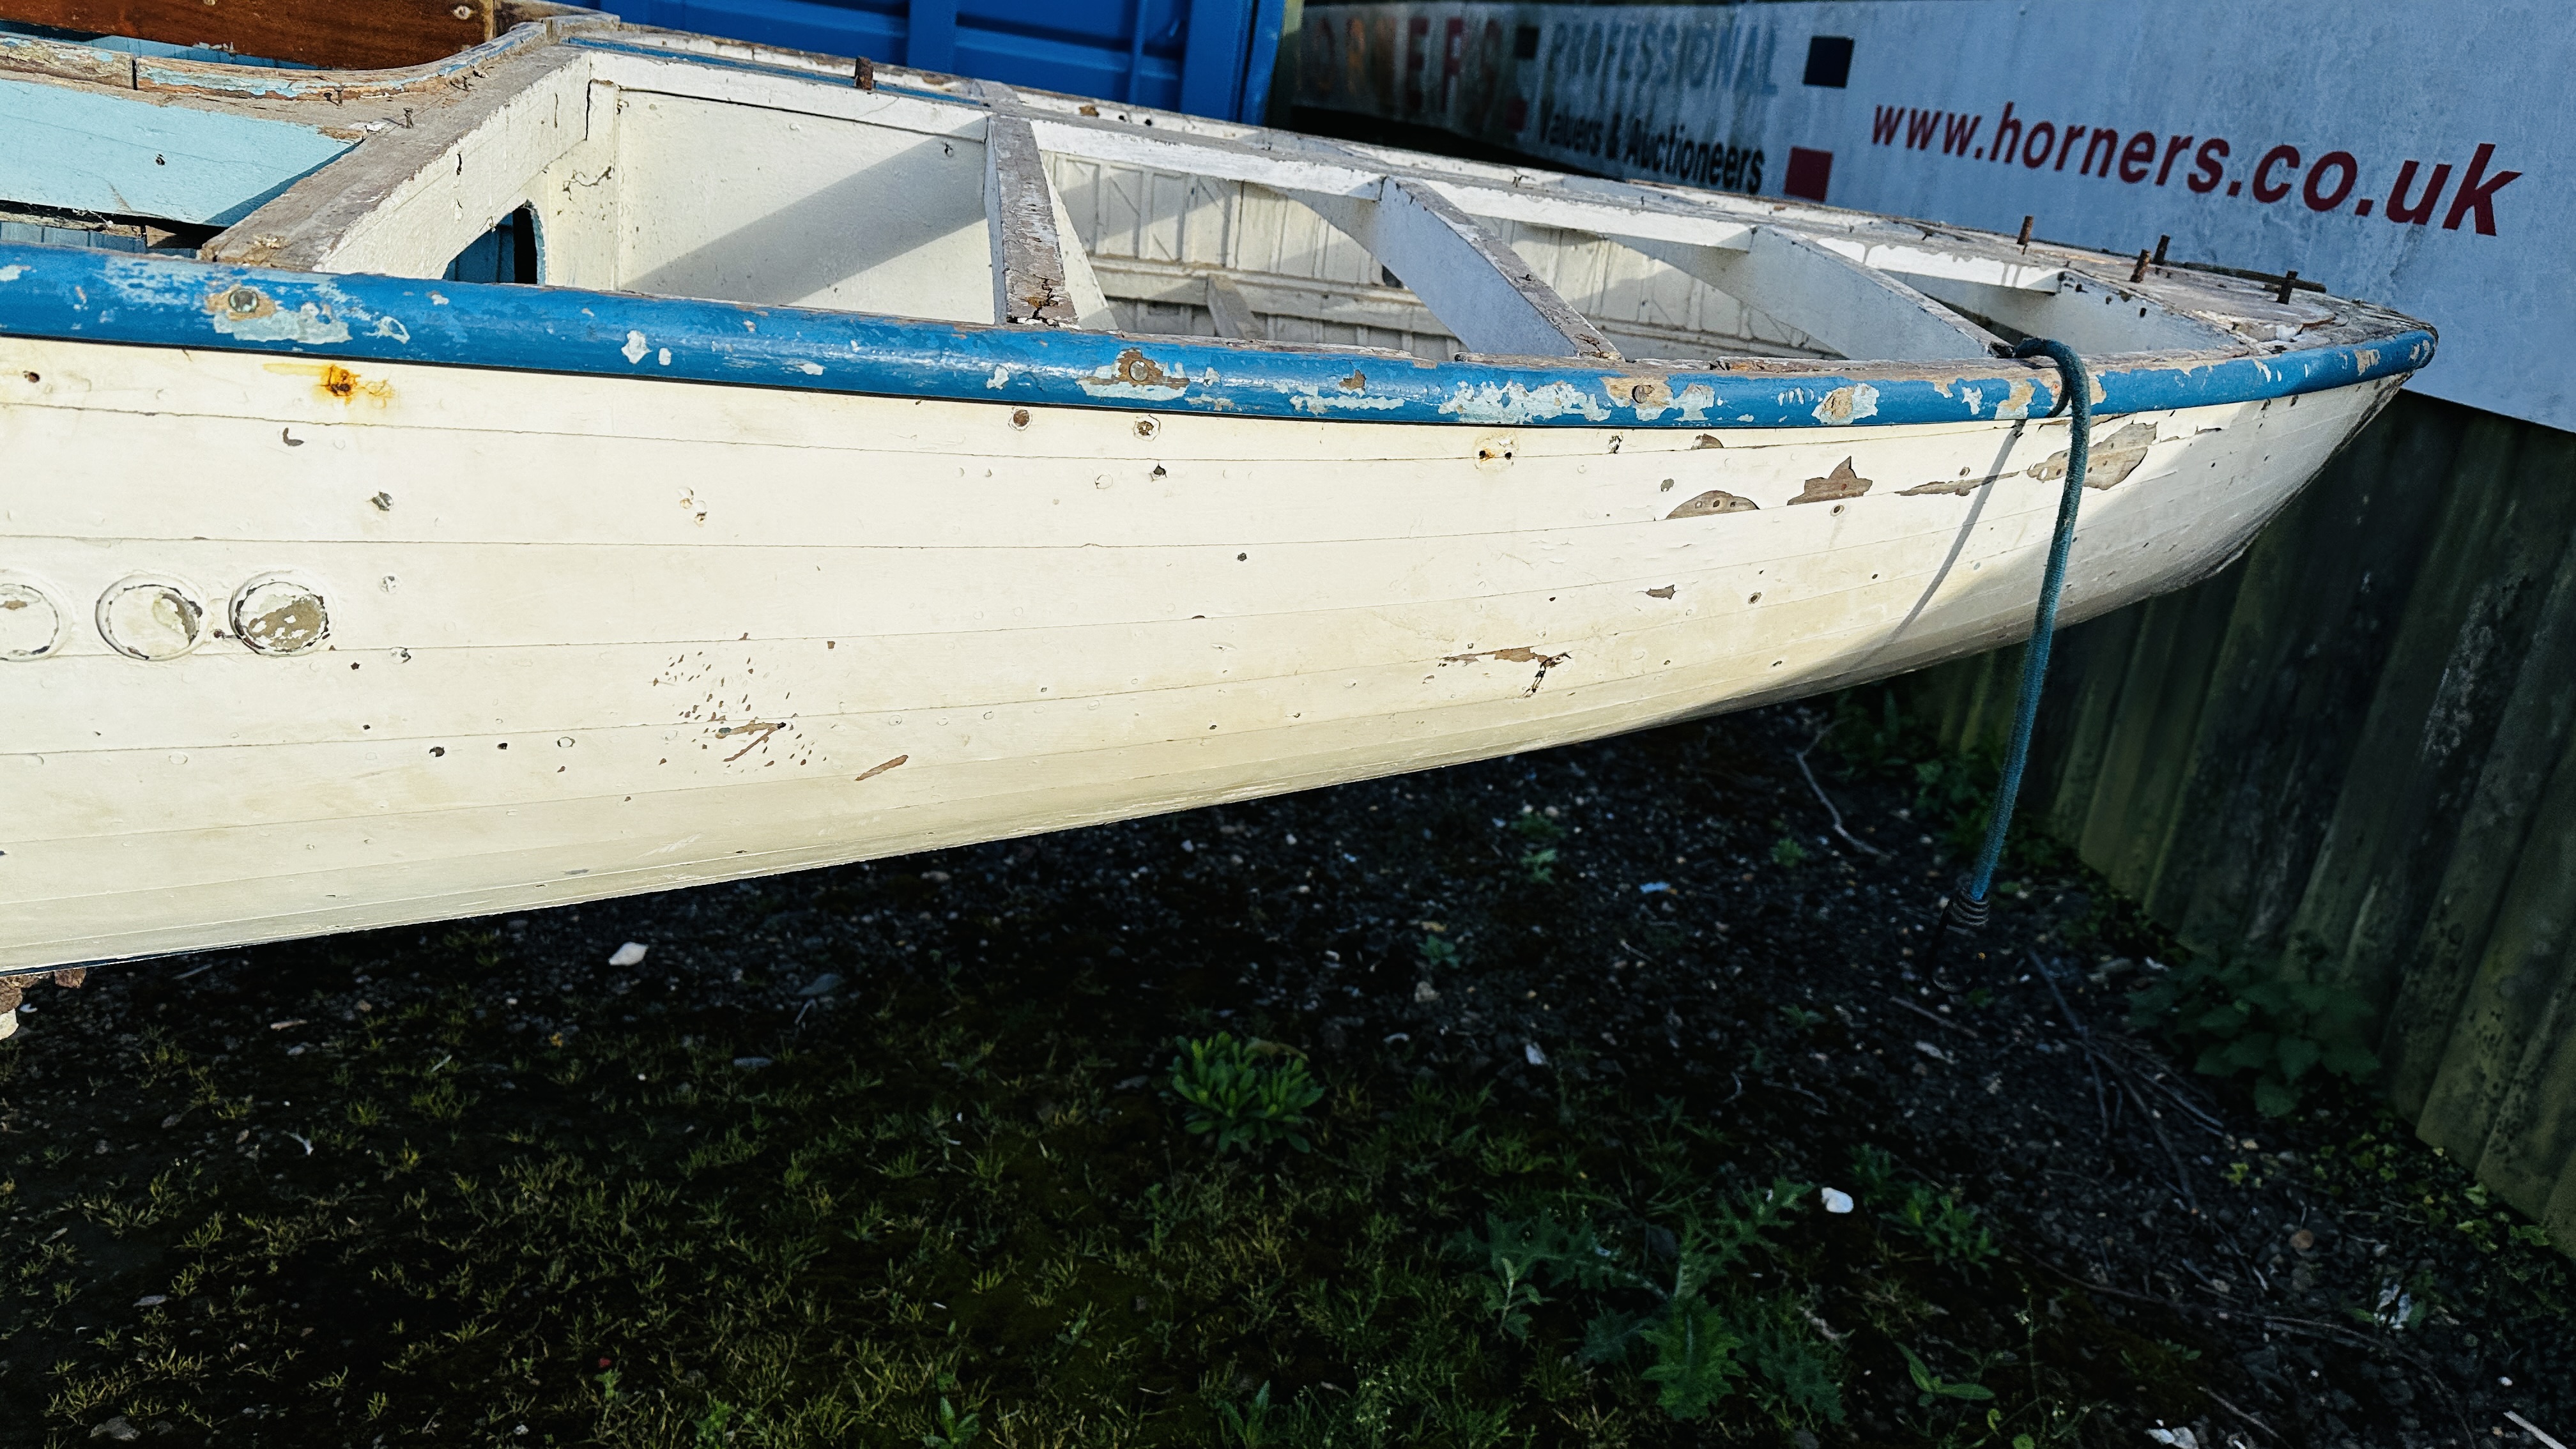 A WW2 UFFA FOX RESCUE BOAT BELIEVED TO BE BUILT BY TAYLOR WOODROW, STAMPED AW11, 1 OF 402 MADE, - Image 39 of 56